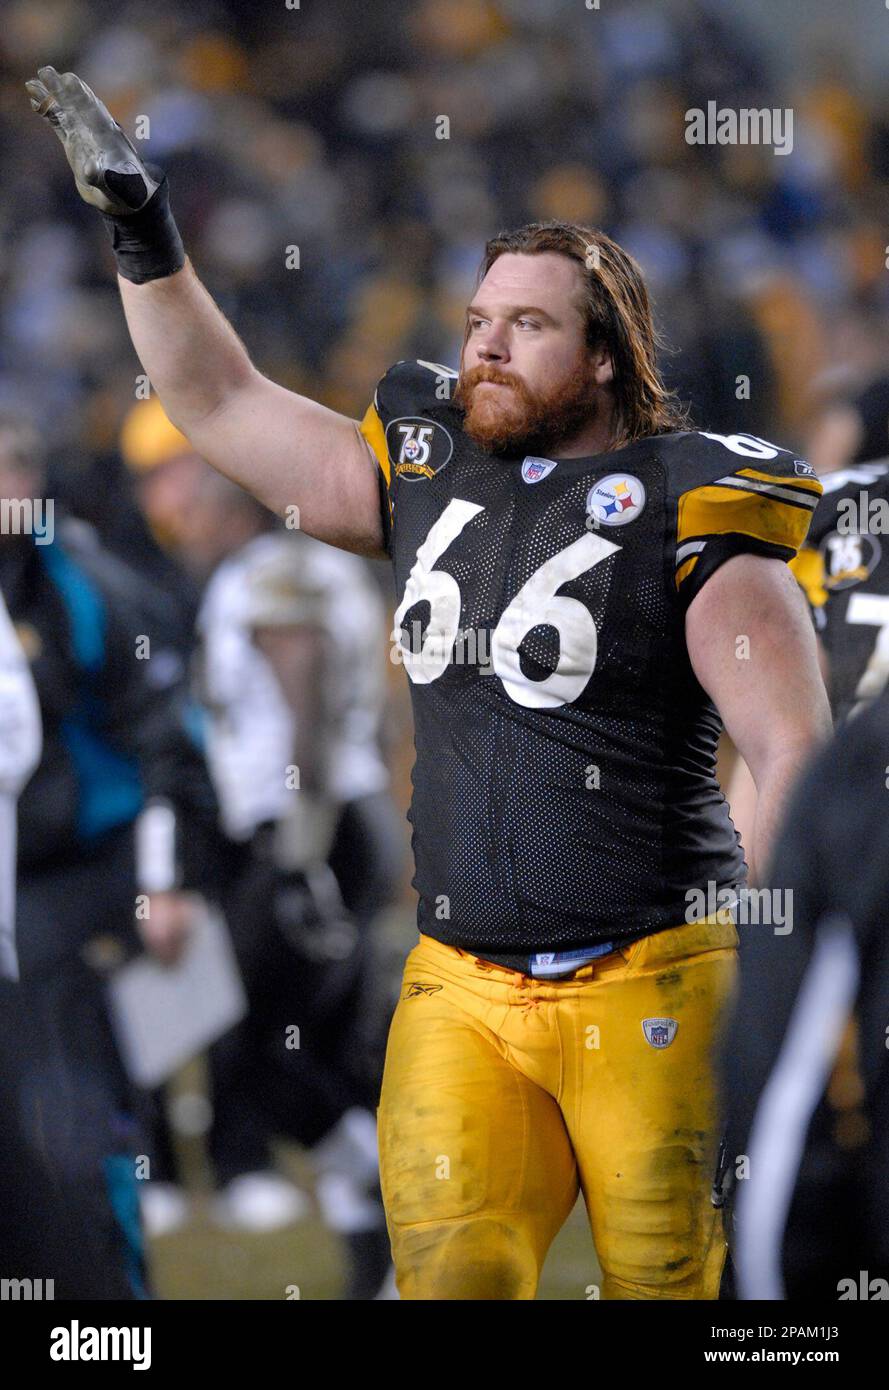 Pittsburgh Steelers offensive lineman Alan Faneca waves to fans after a  31-29 loss to the Jacksonville Jaguars in an NFL wild card playoff football  game in Pittsburgh, Saturday, Jan. 5, 2008. (AP